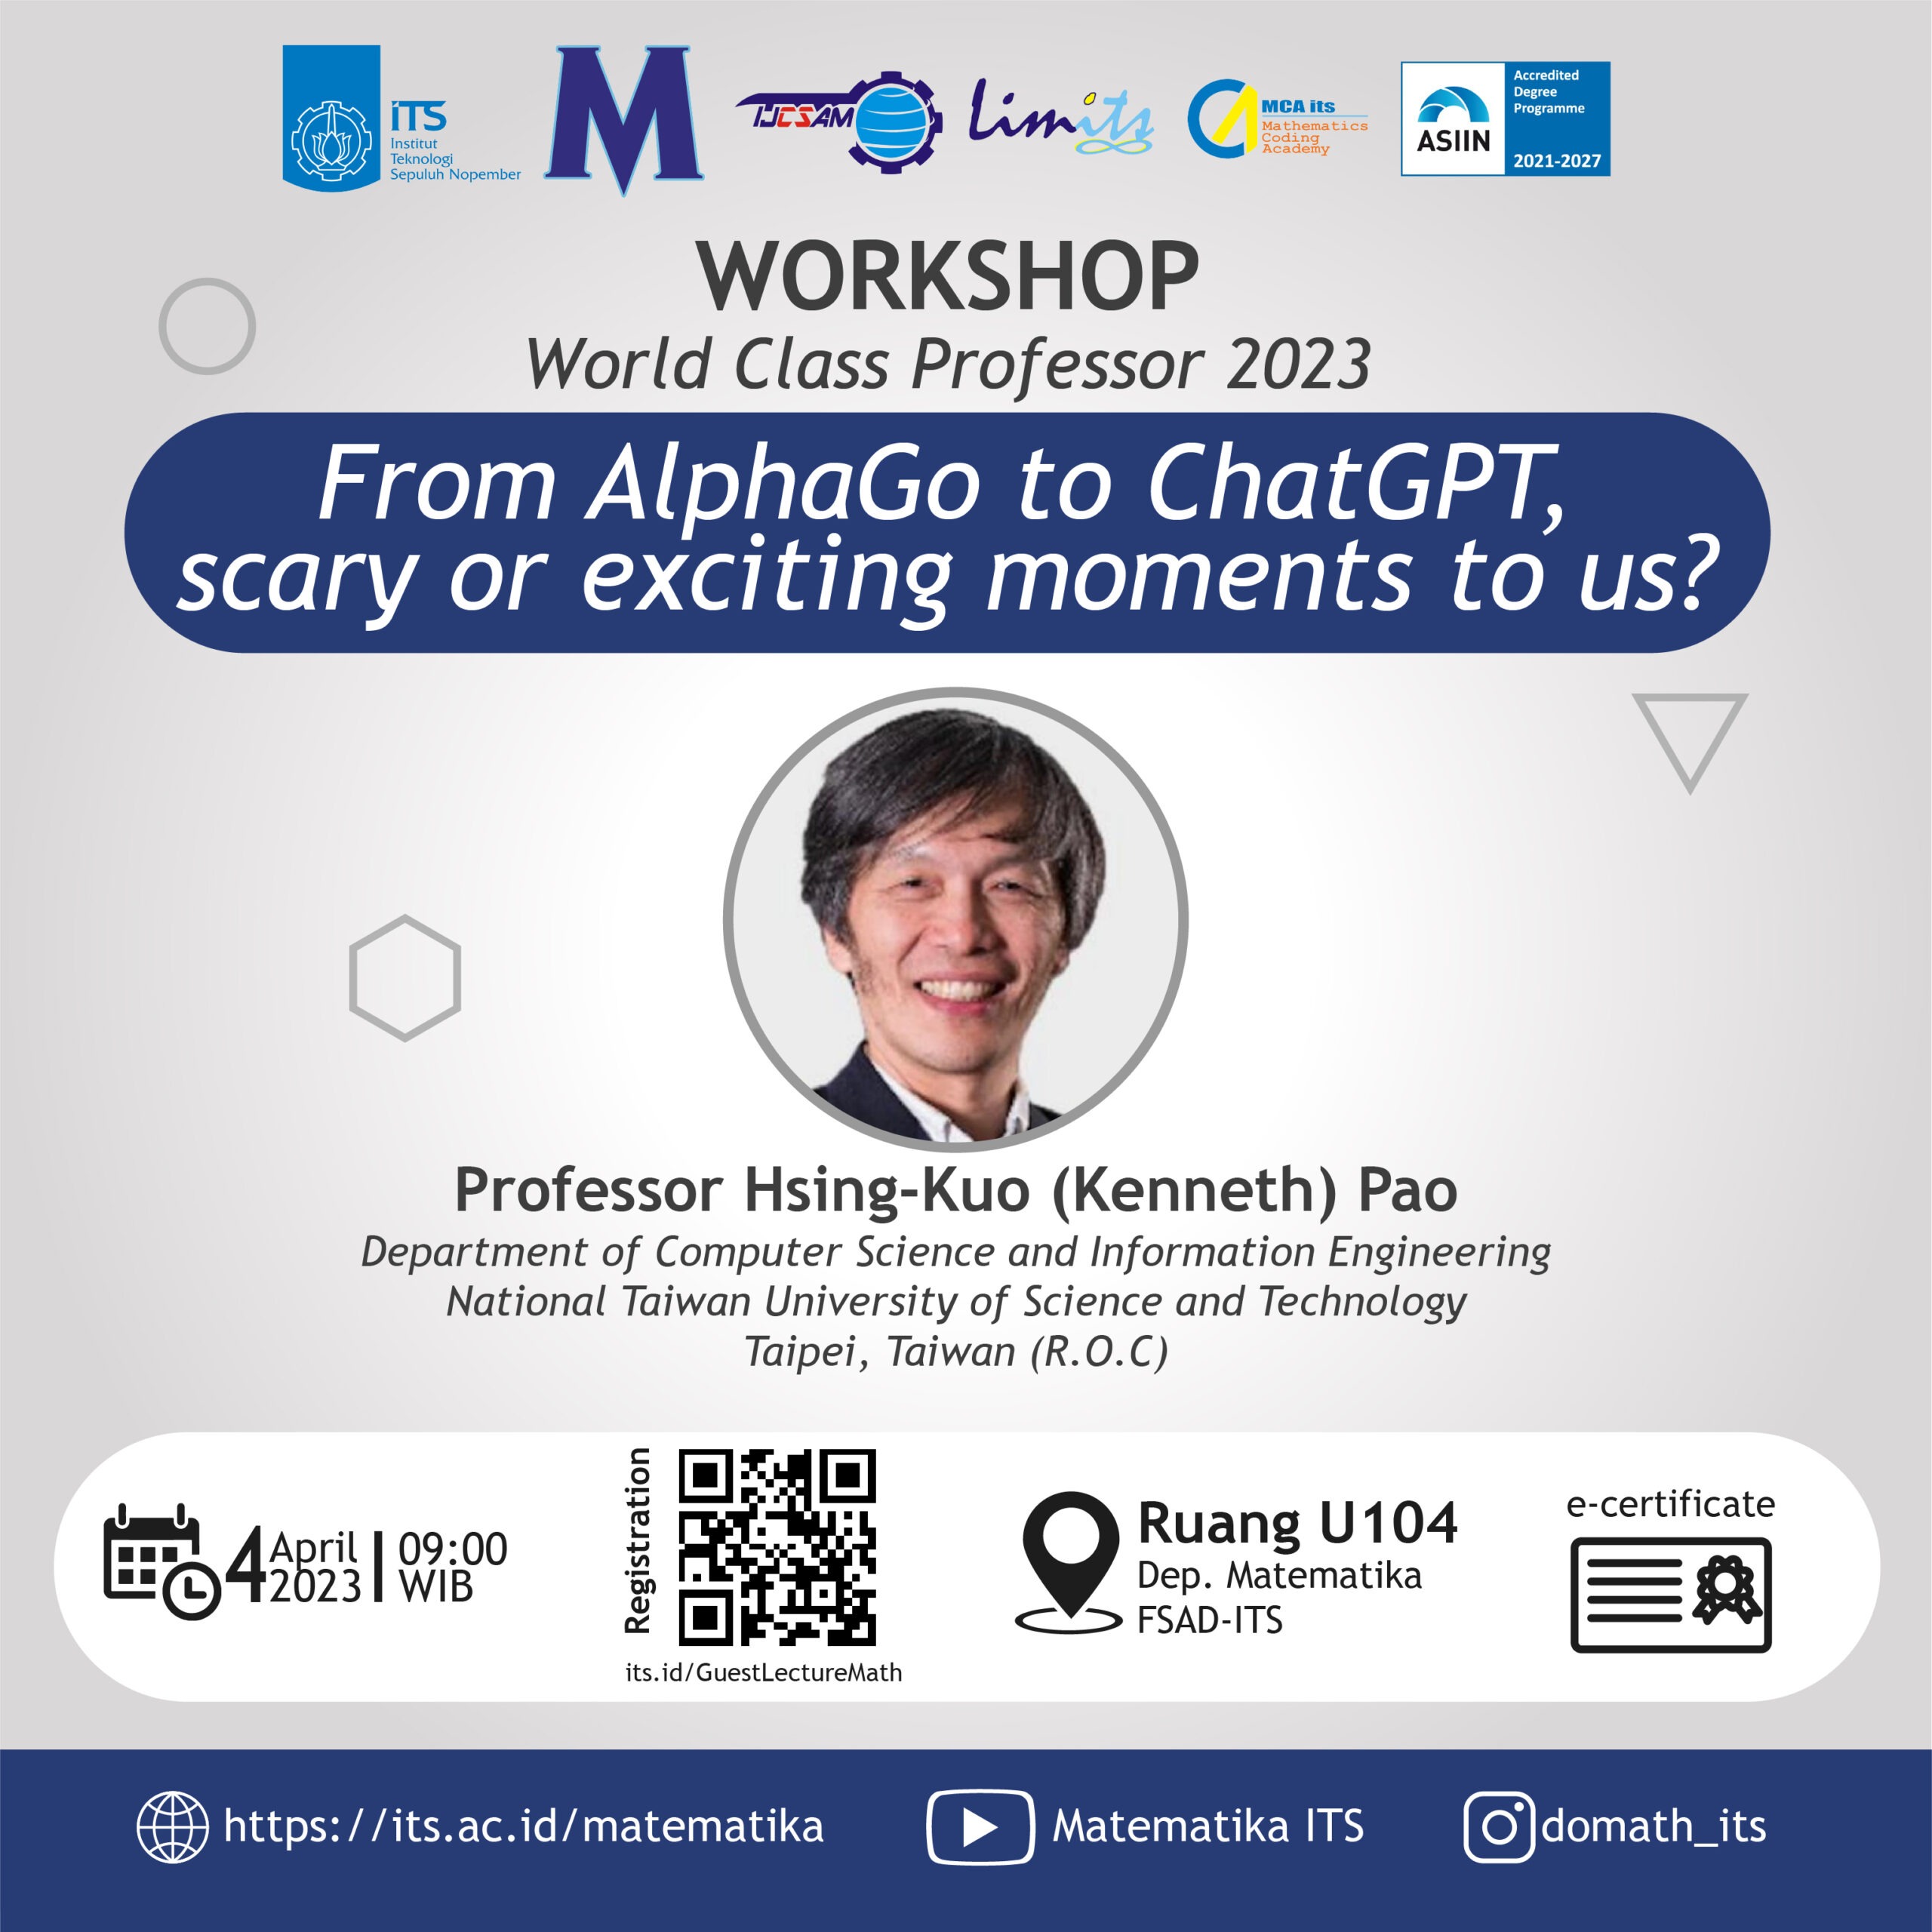 From AlphaGo to ChatGPT, scary or exciting moments to us